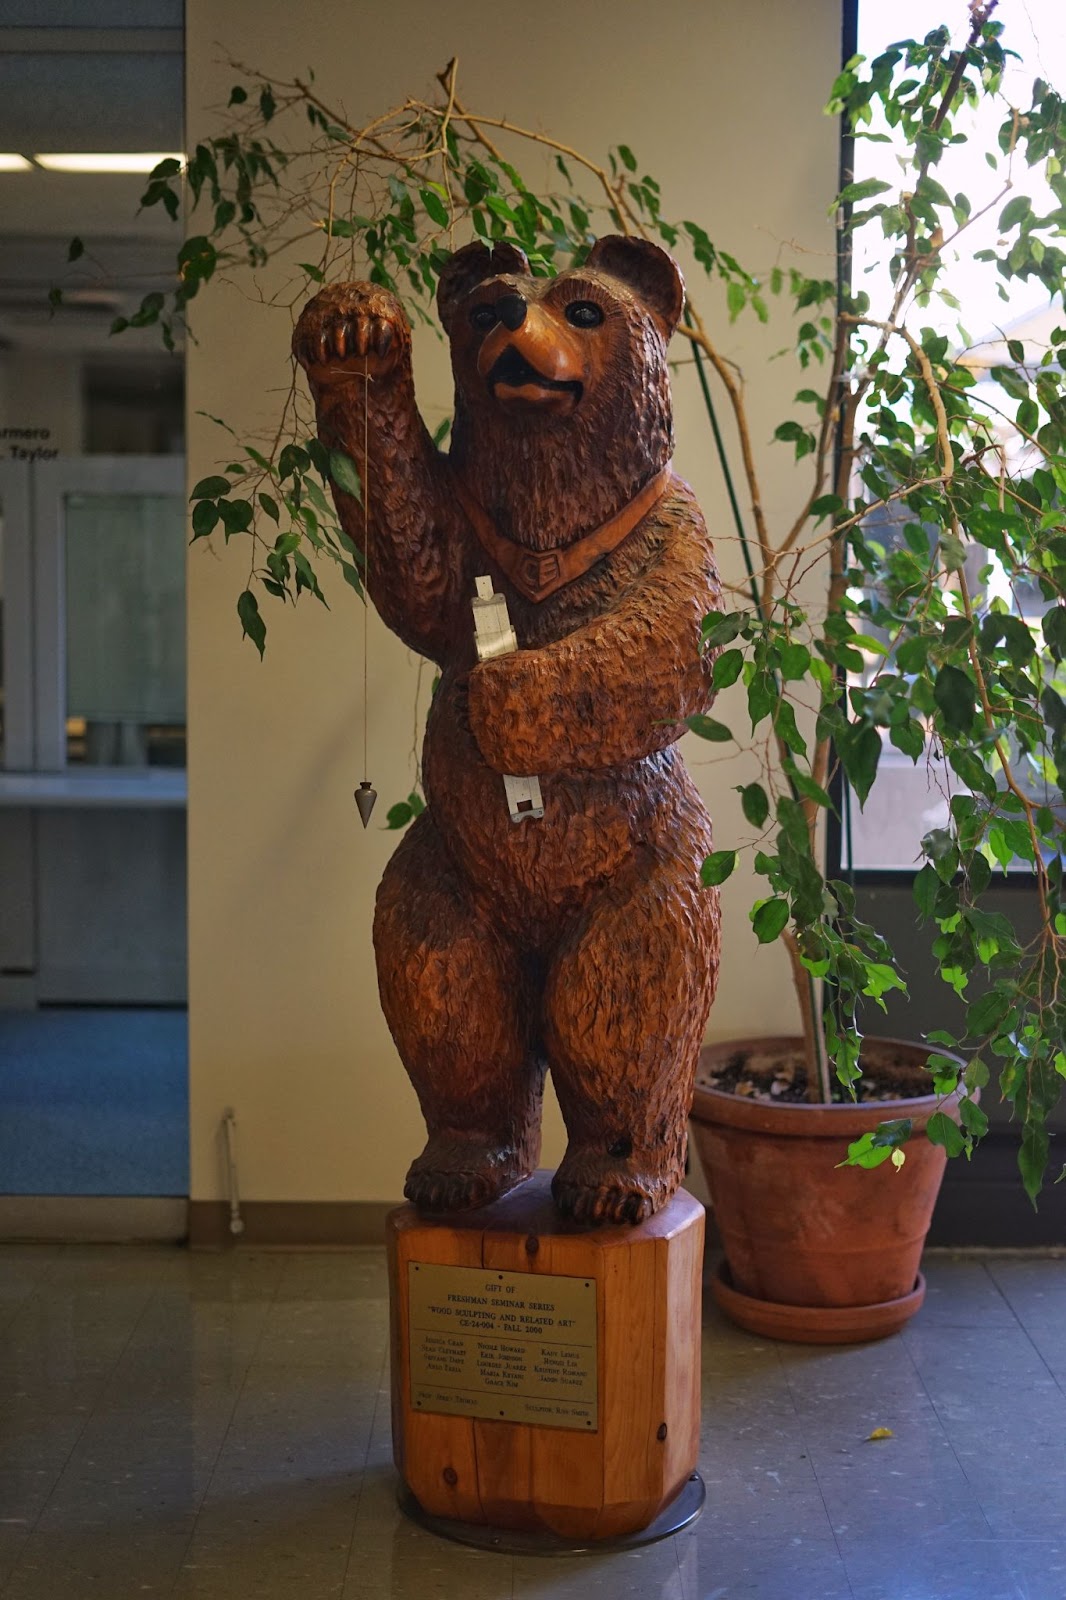 A bear staatue, standing erect, holding a pendulum and a chainsaw.